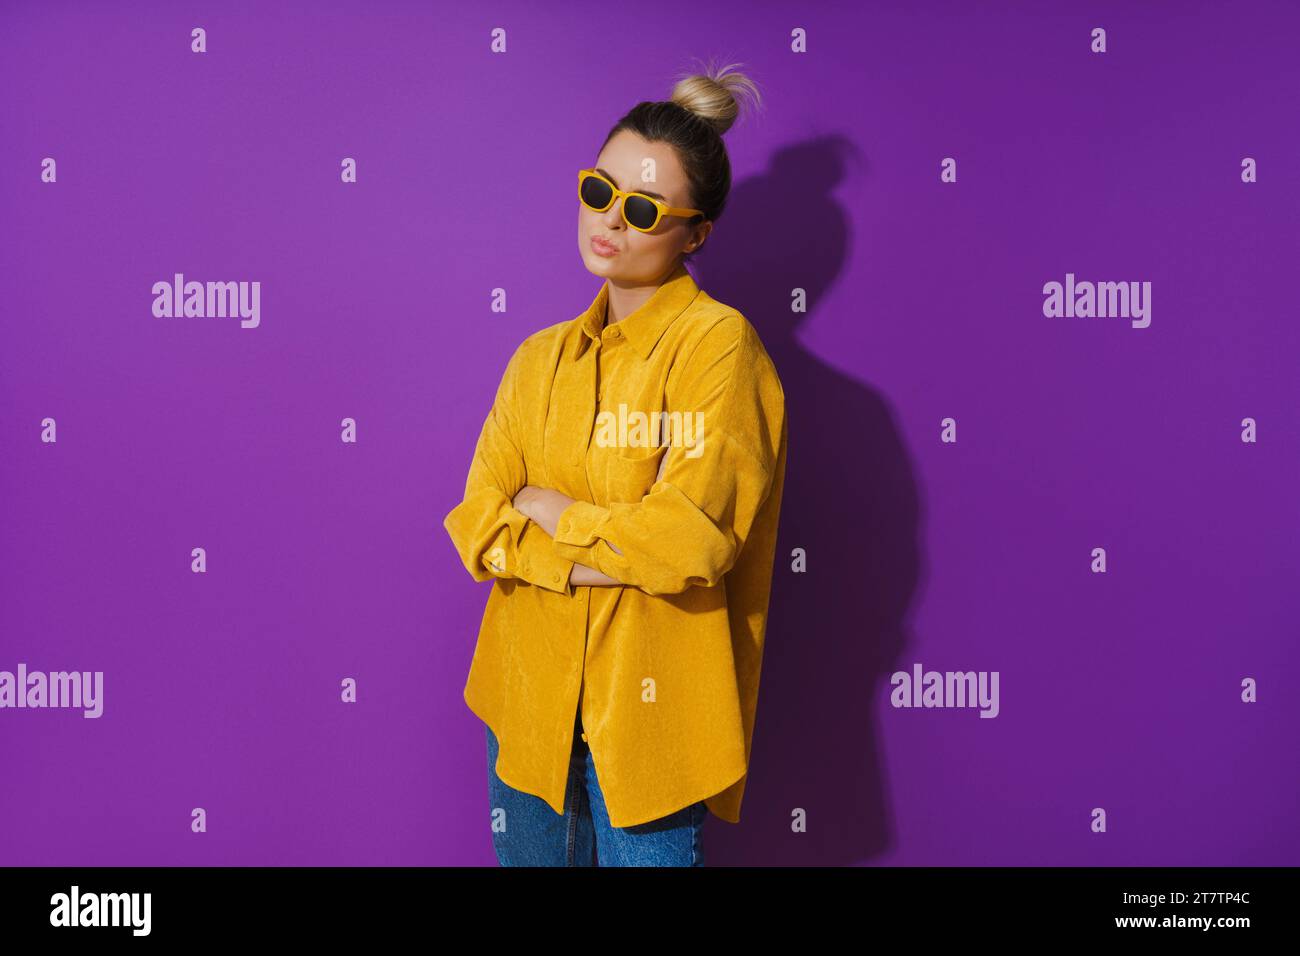 Young girl wearing yellow shirt and sunglasses showing disdain expression against purple background Stock Photo